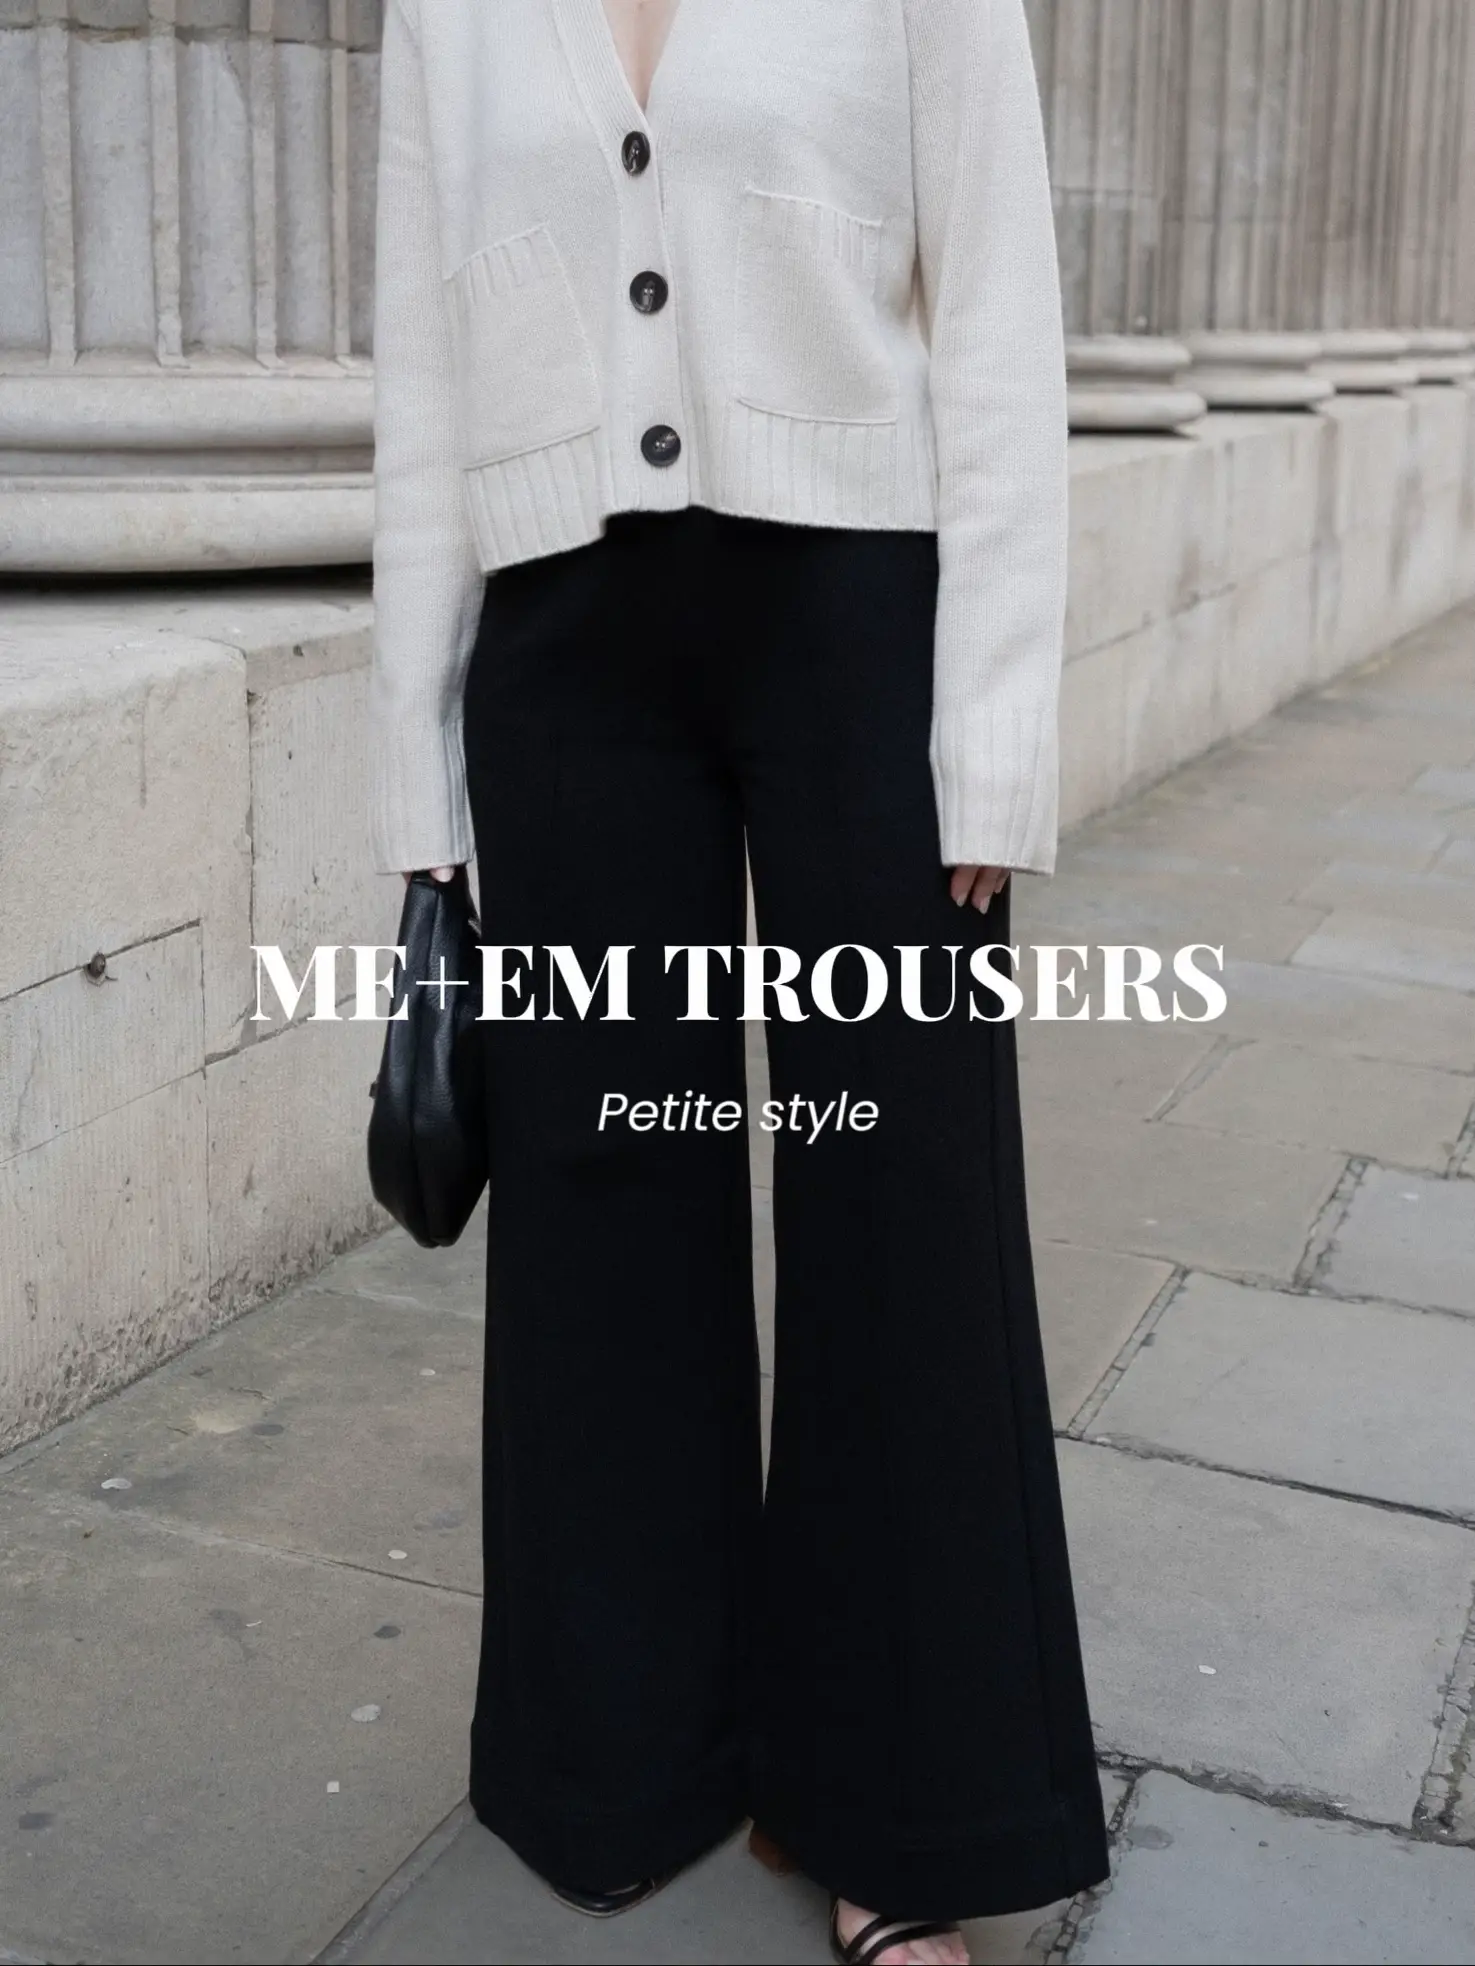 ME+EM trousers review ✨ Petite style